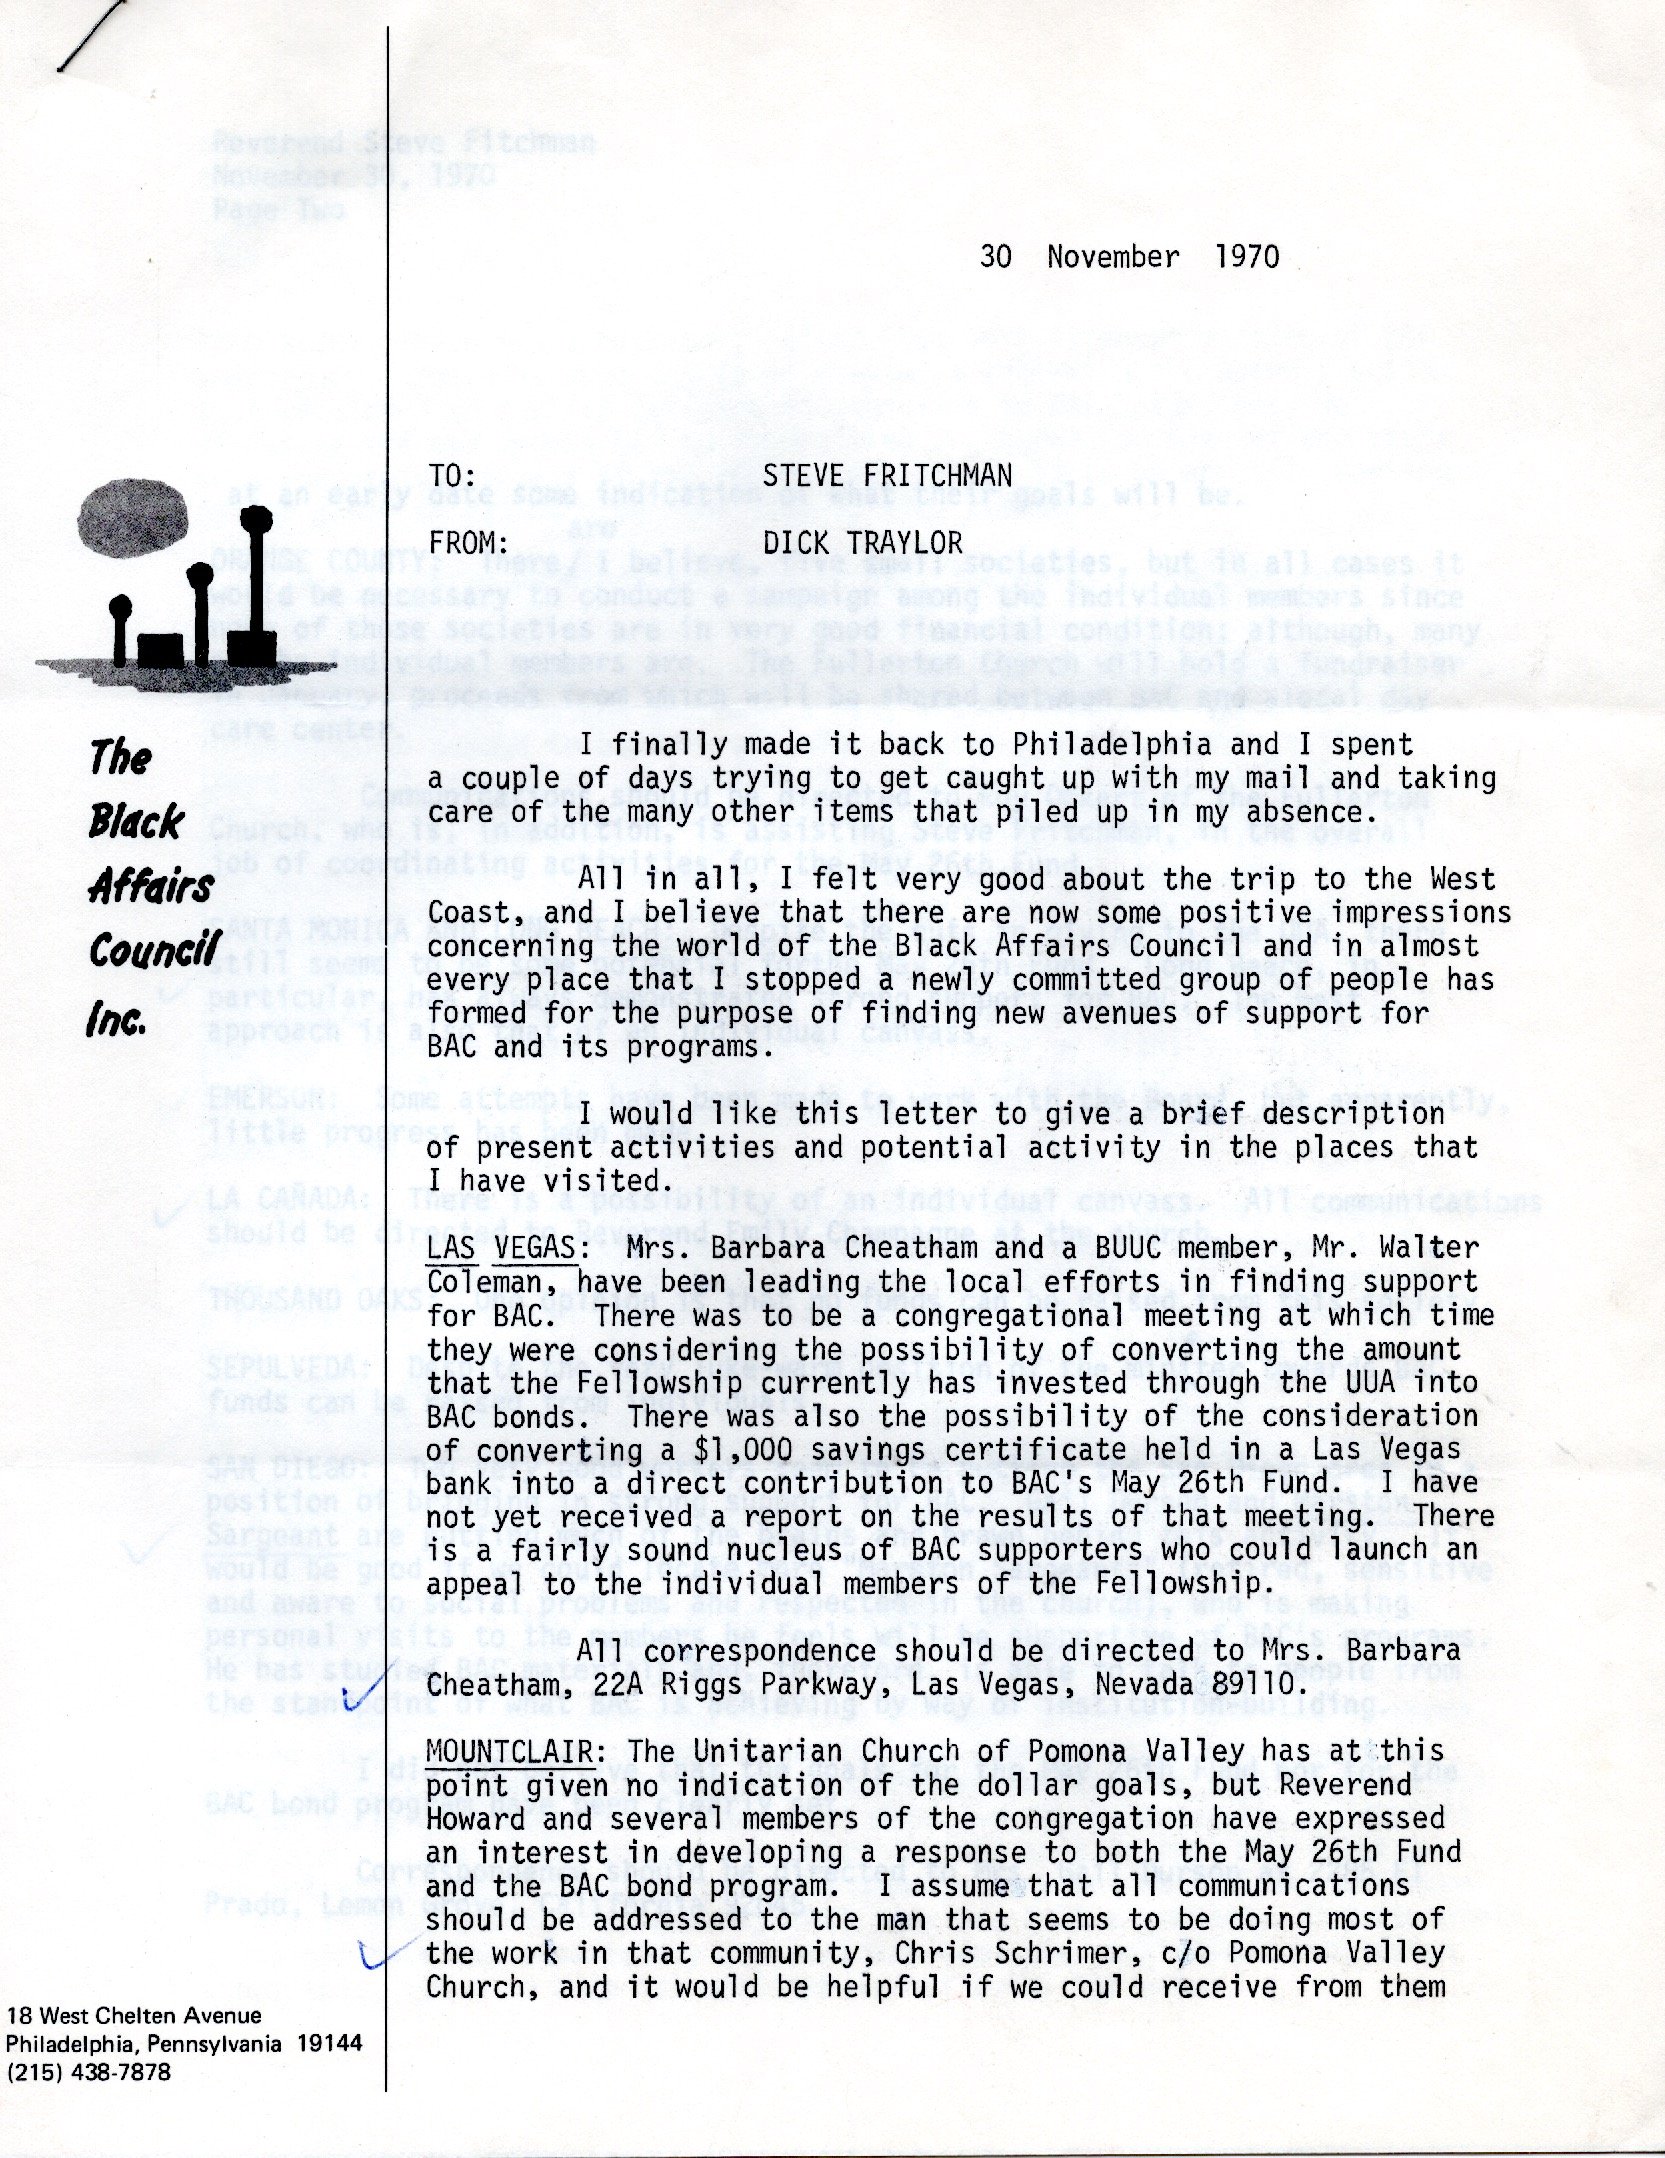 1970.11.30 memo from Dick Traylor to Fritchman_0001.jpg